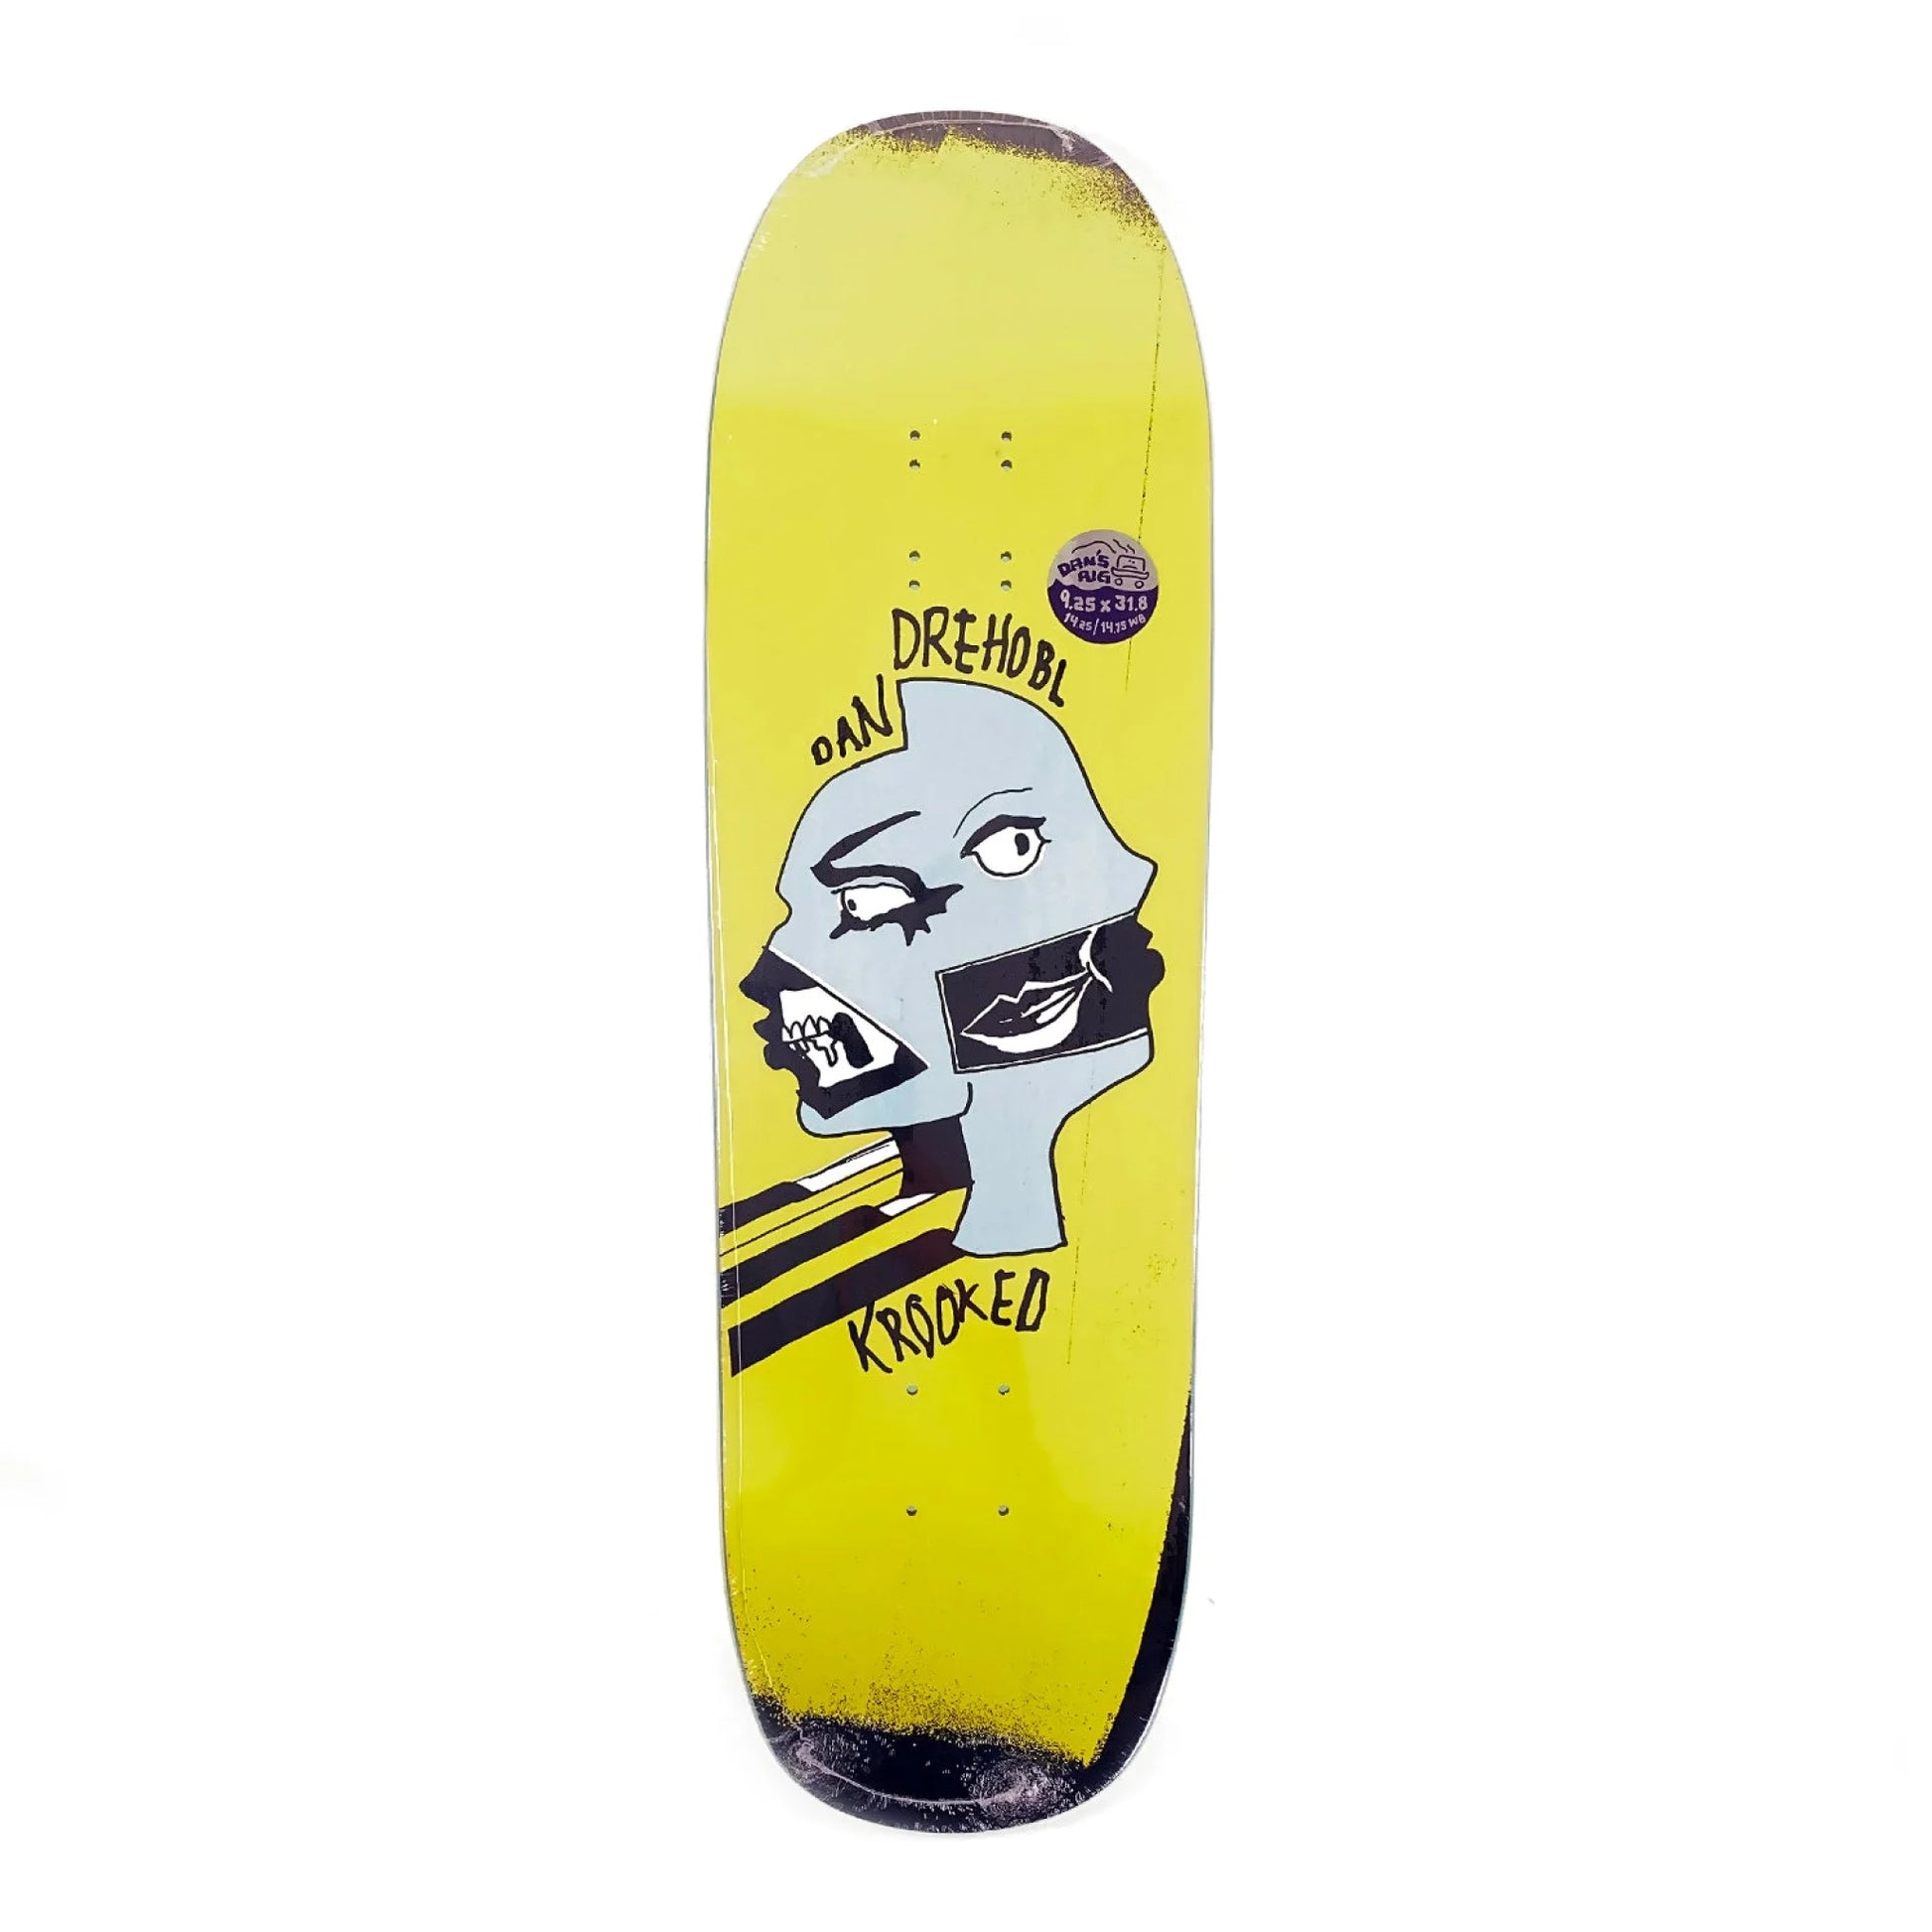 Krooked Drehobl Two Face Pro Deck Yellow - 9.25" - Prime Delux Store